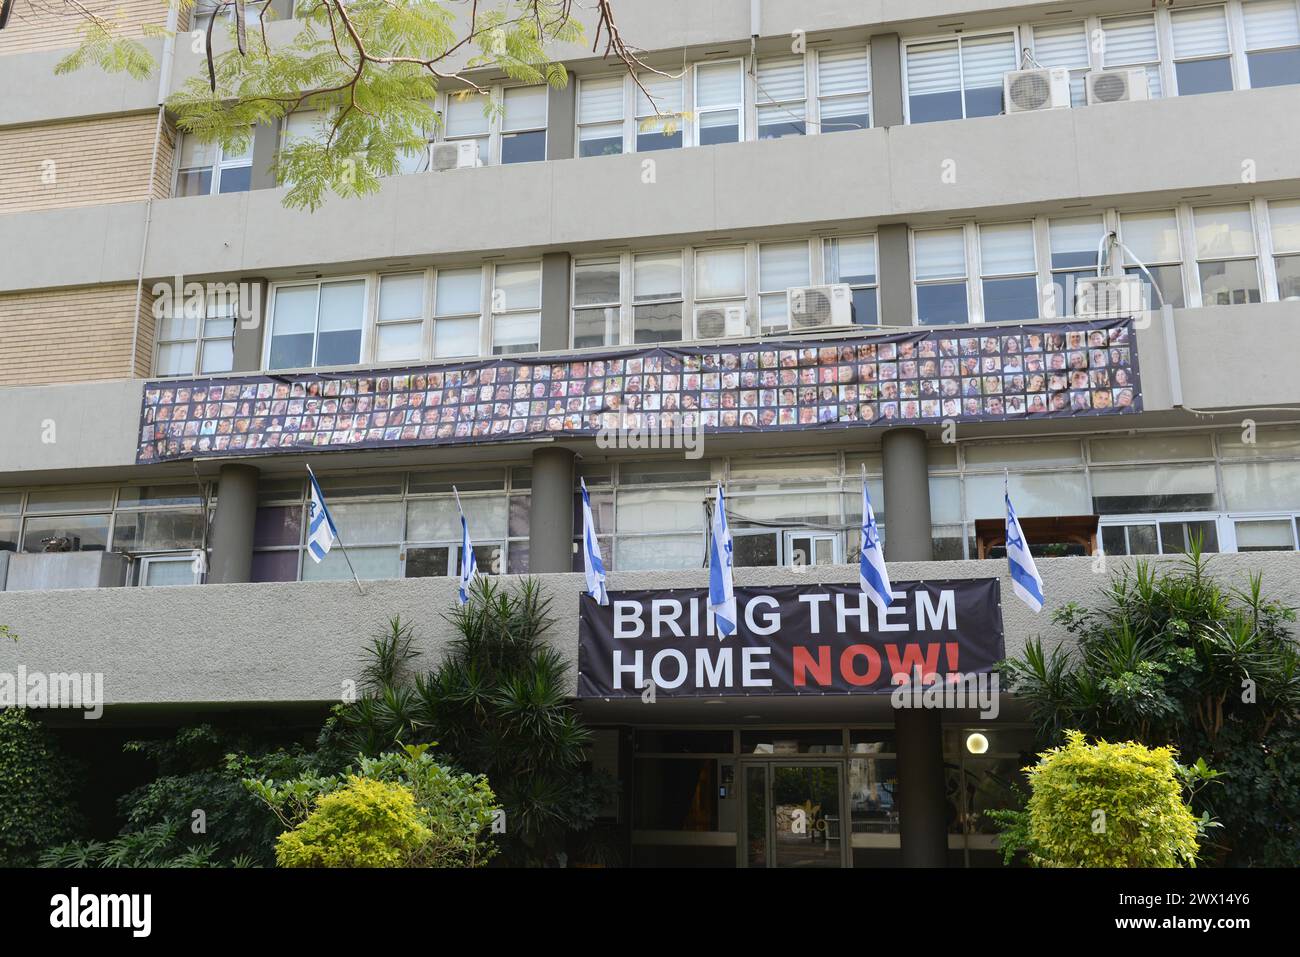 Bring the hostages home now signs hanged on Wizo building, David Hamelech Blvd, Tel-Aviv, Israel. Stock Photo